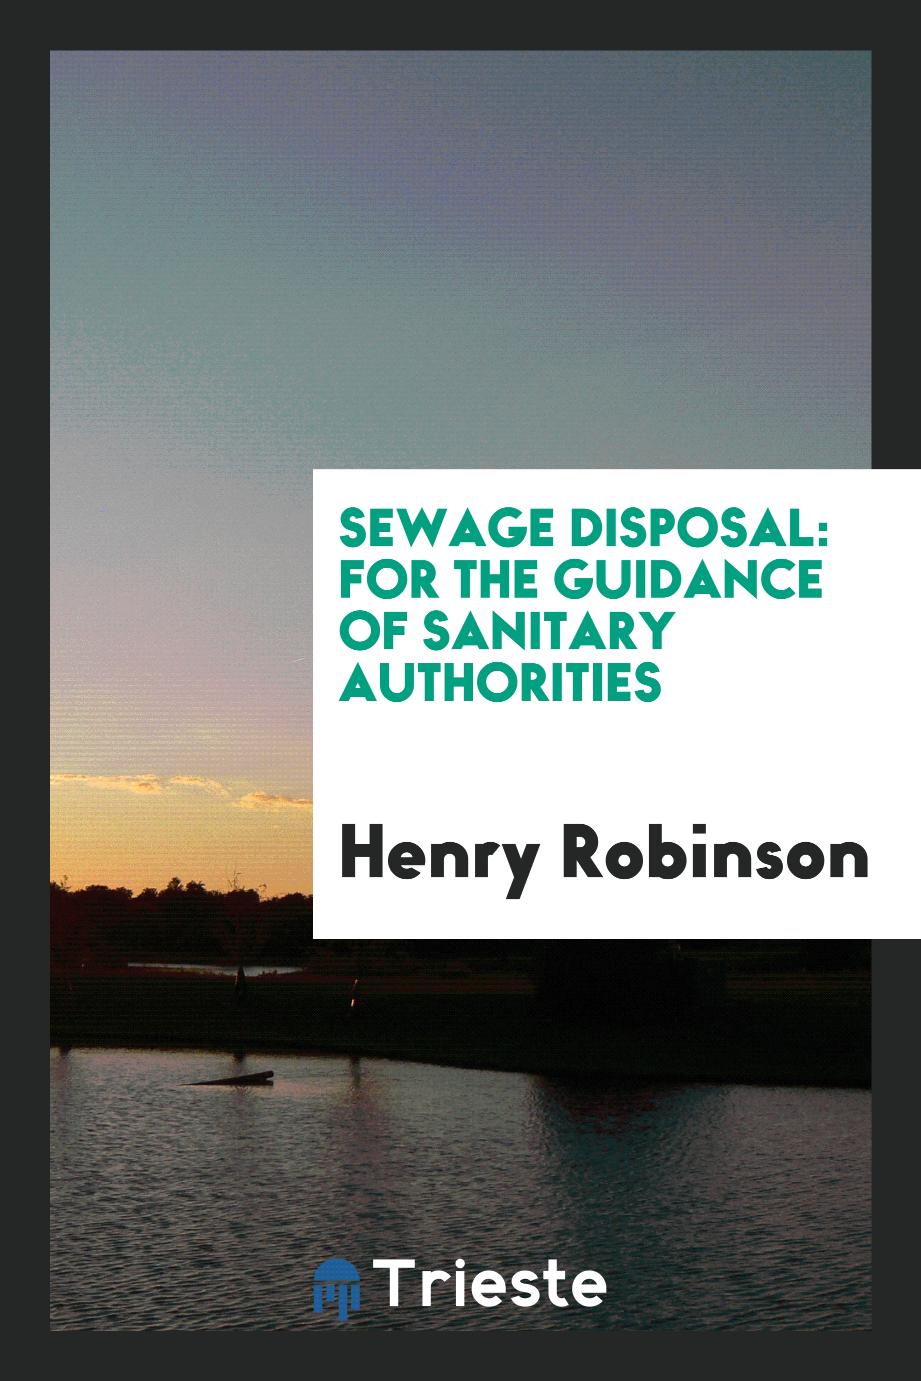 Sewage Disposal: For the Guidance of Sanitary Authorities